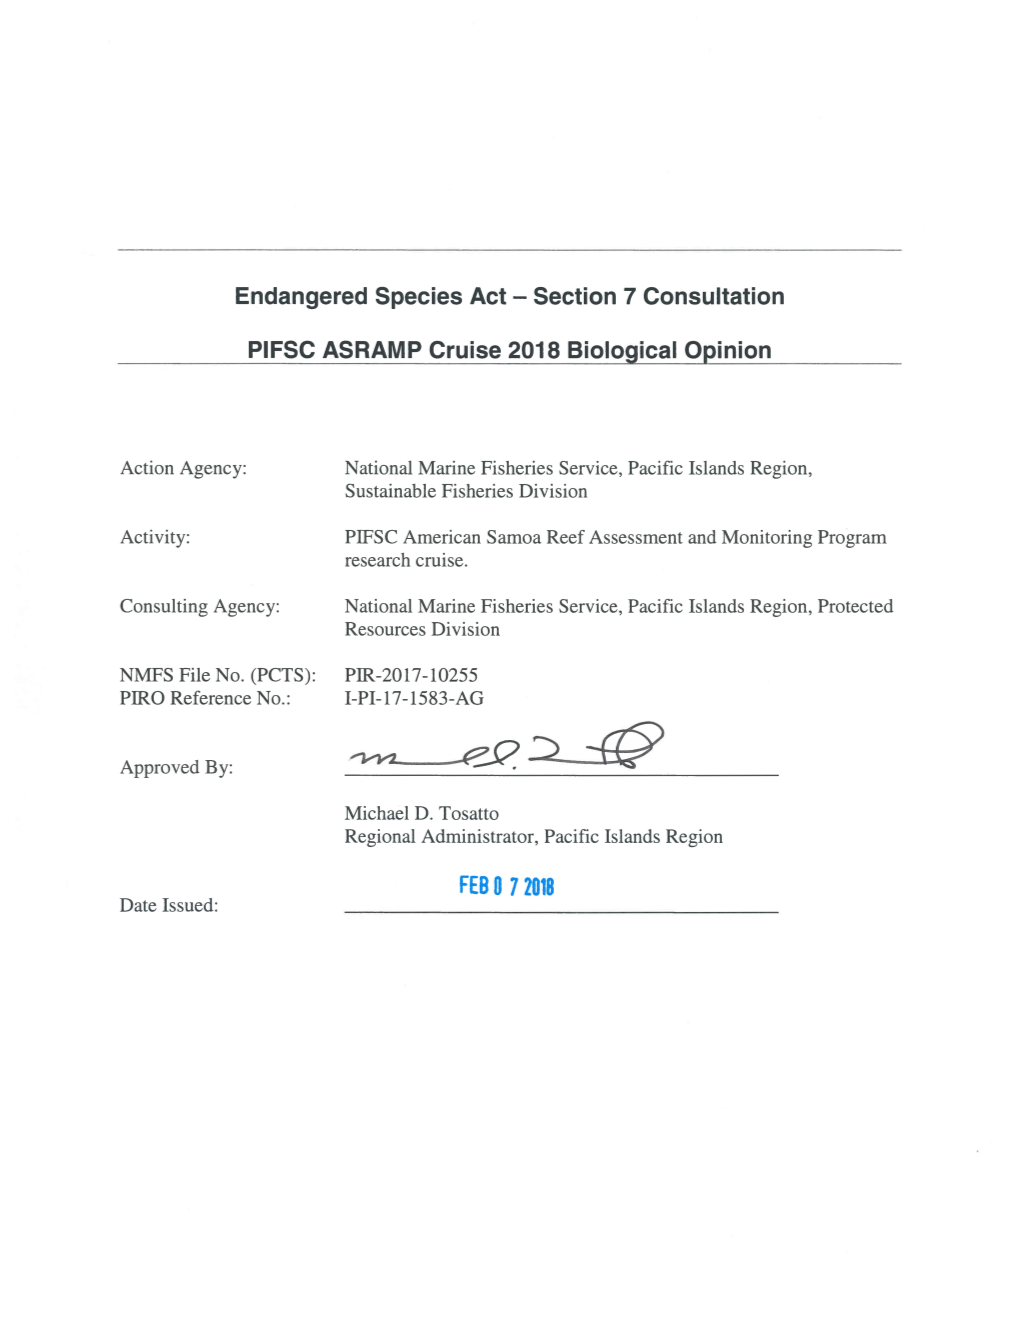 FEBO 7 2018 Date Issued: Table of Contents 1